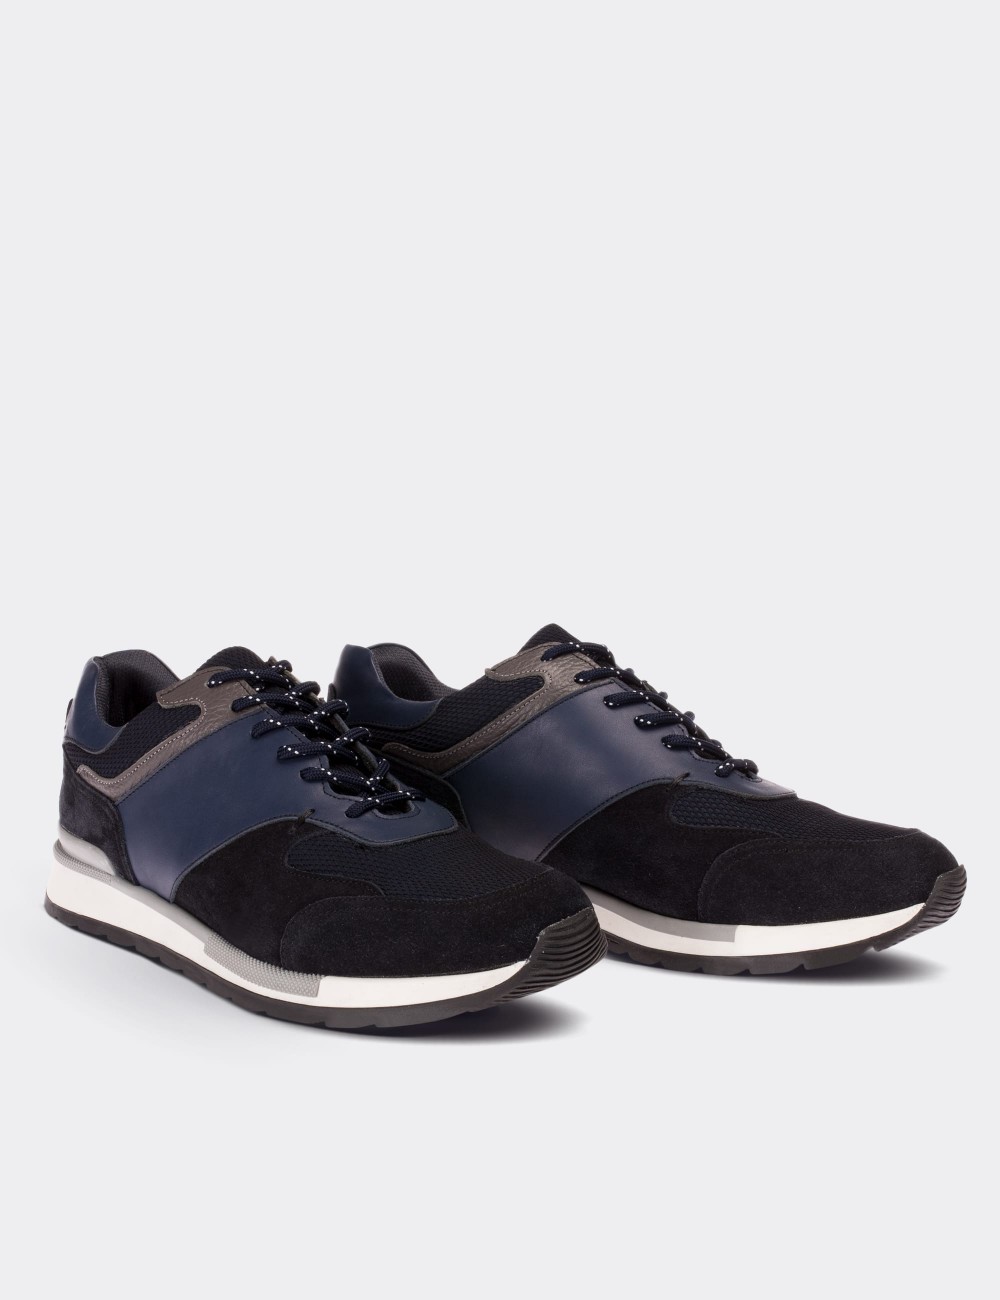 Navy Suede Leather Sneakers - 01718MLCVT01